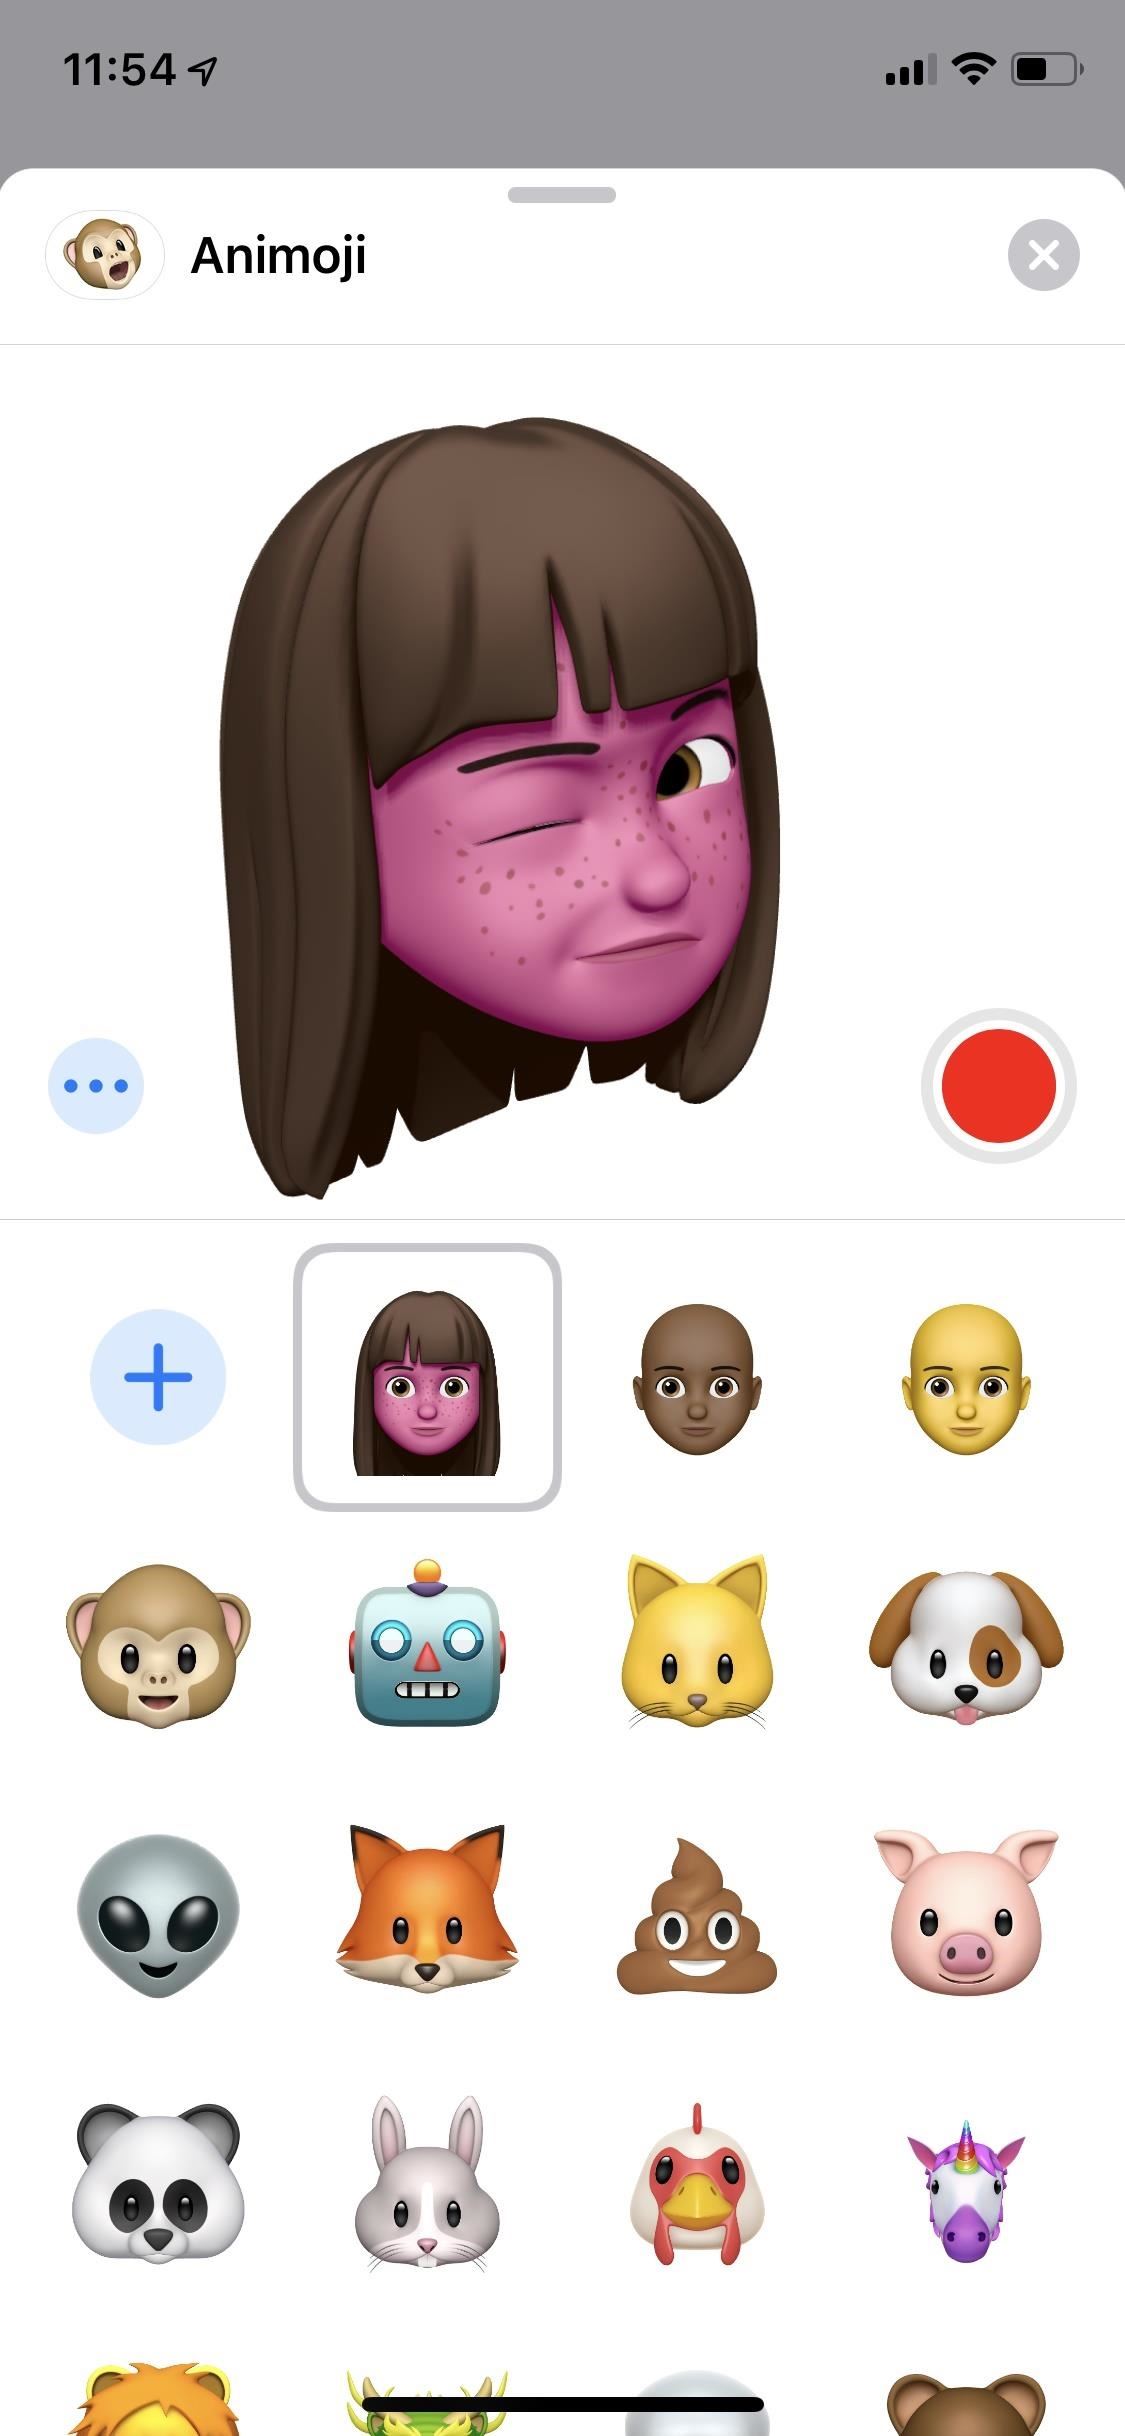 100+ Coolest New iOS 12 Features You Didn't Know About